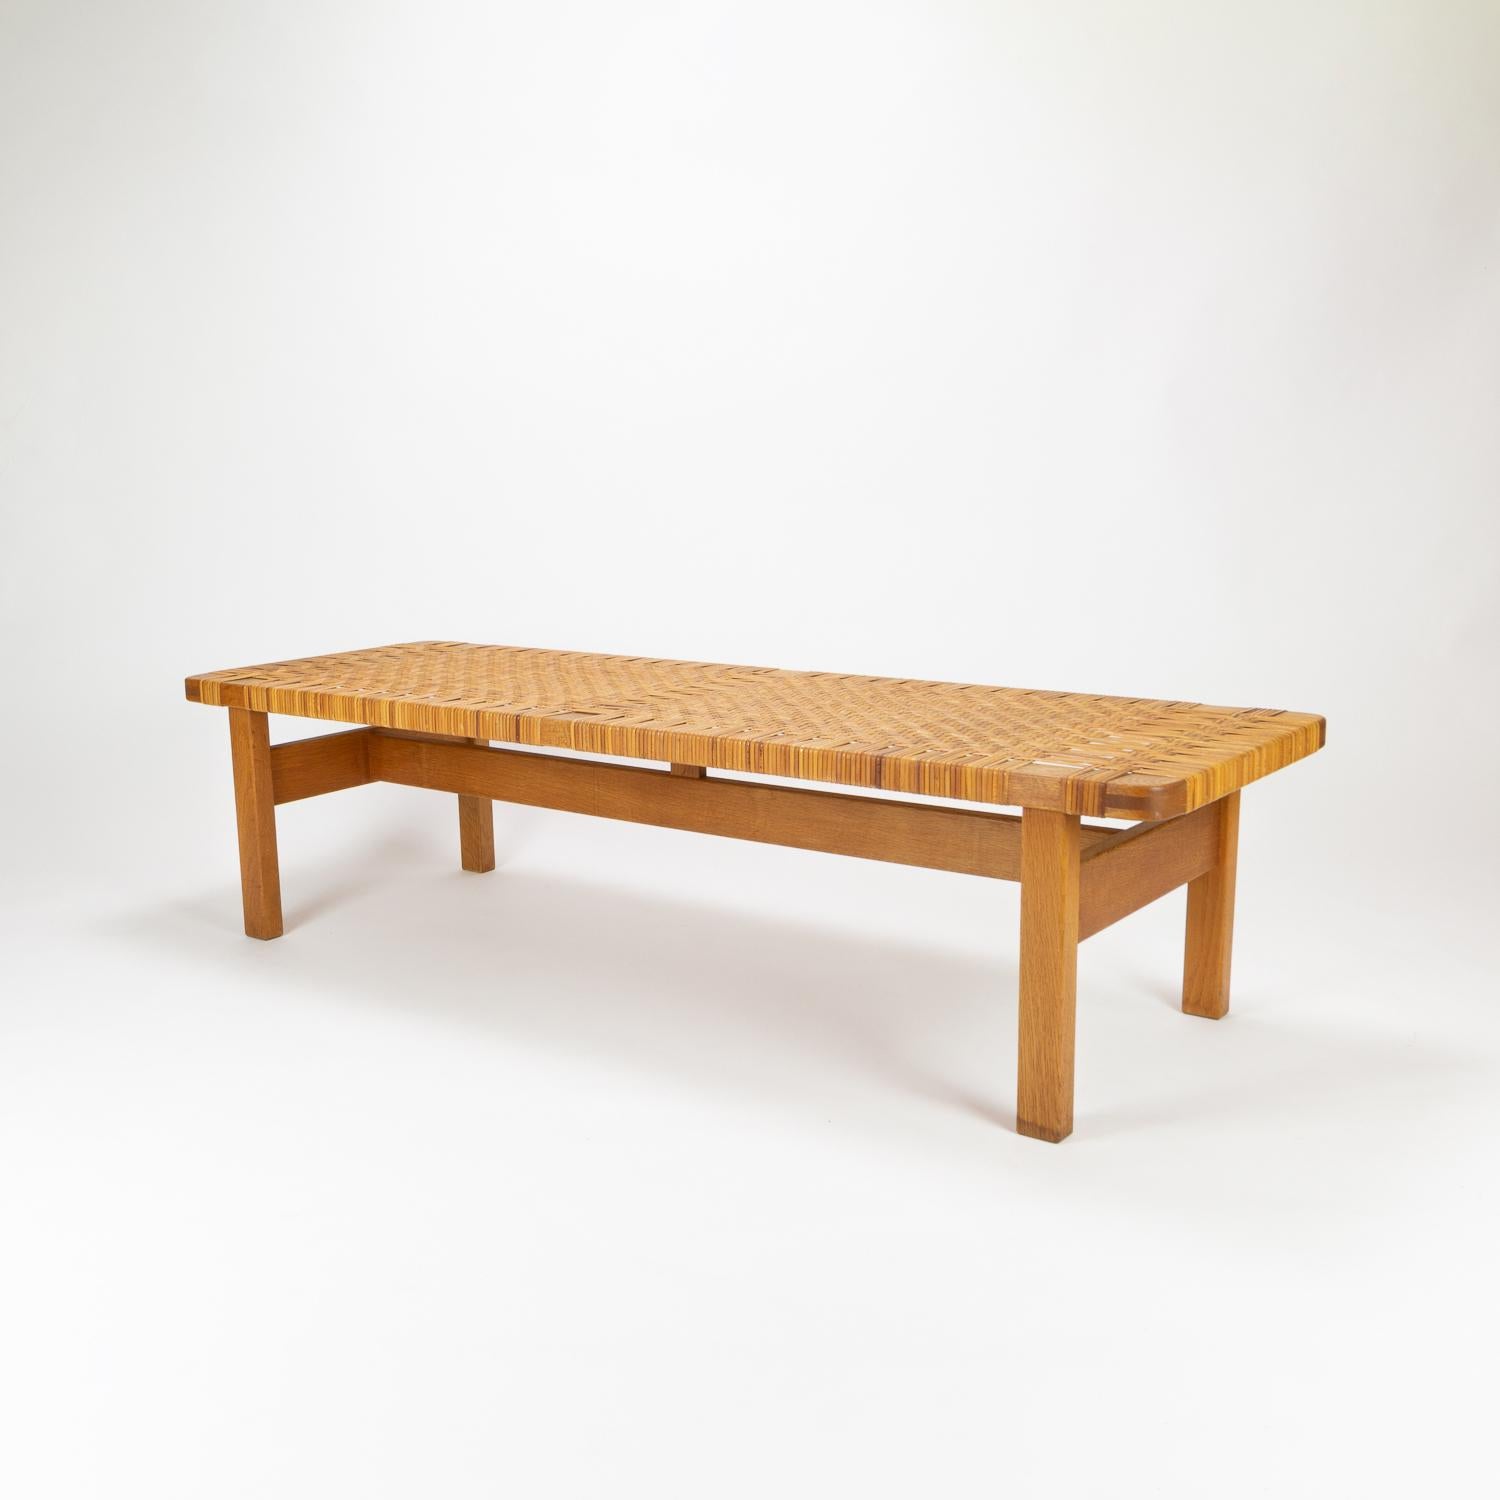 A cane and oak Mid Century Model 5272 bench by Børge Mogensen in great original vintage condition. Fredericia Stolefabrik, Denmark, 1950s.